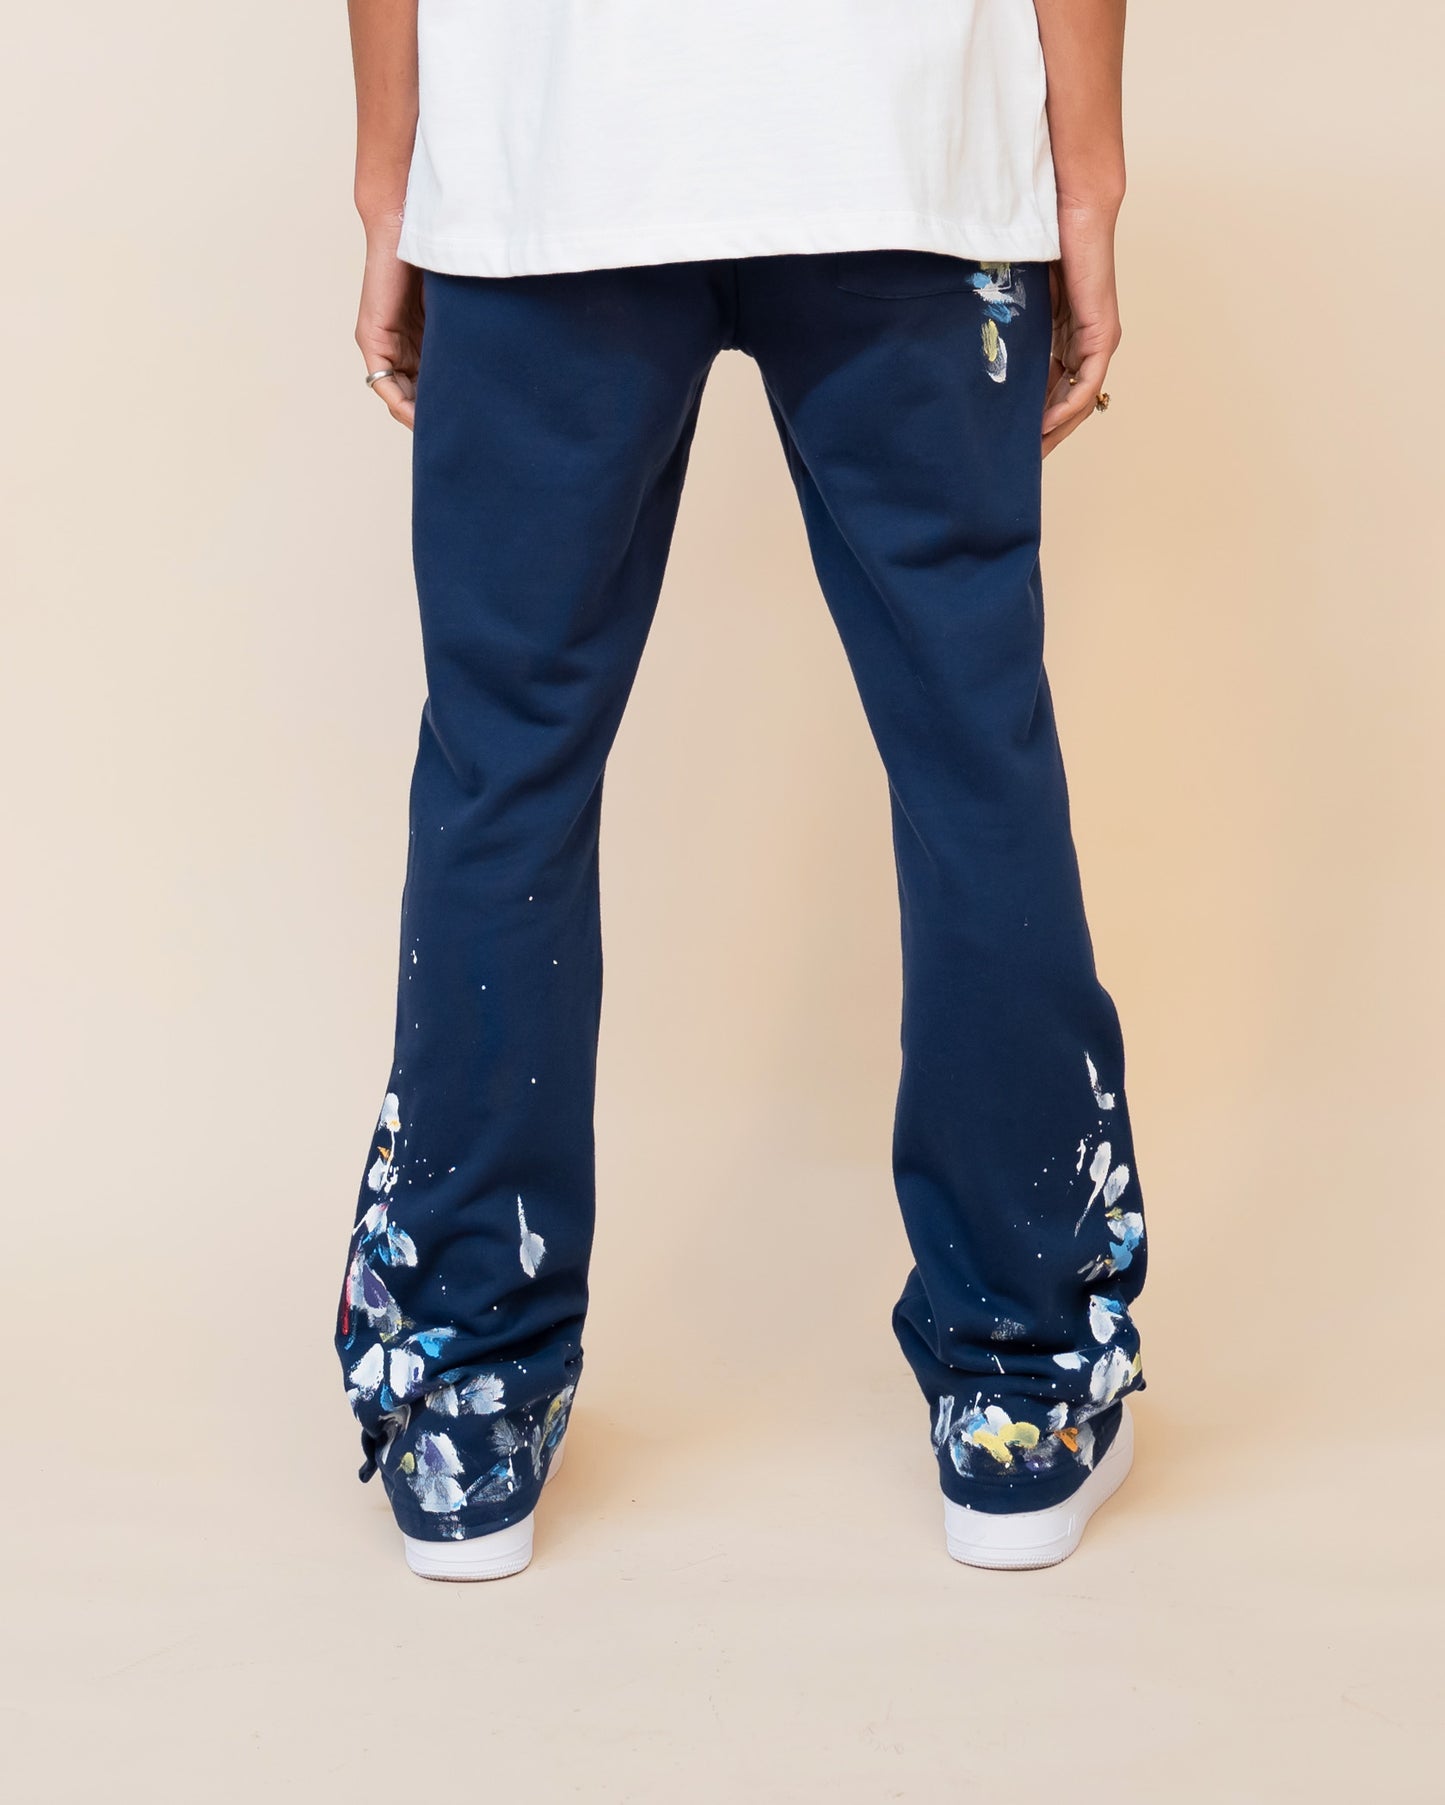 EPTM PAINT SNAP FLARED PANTS - NAVY